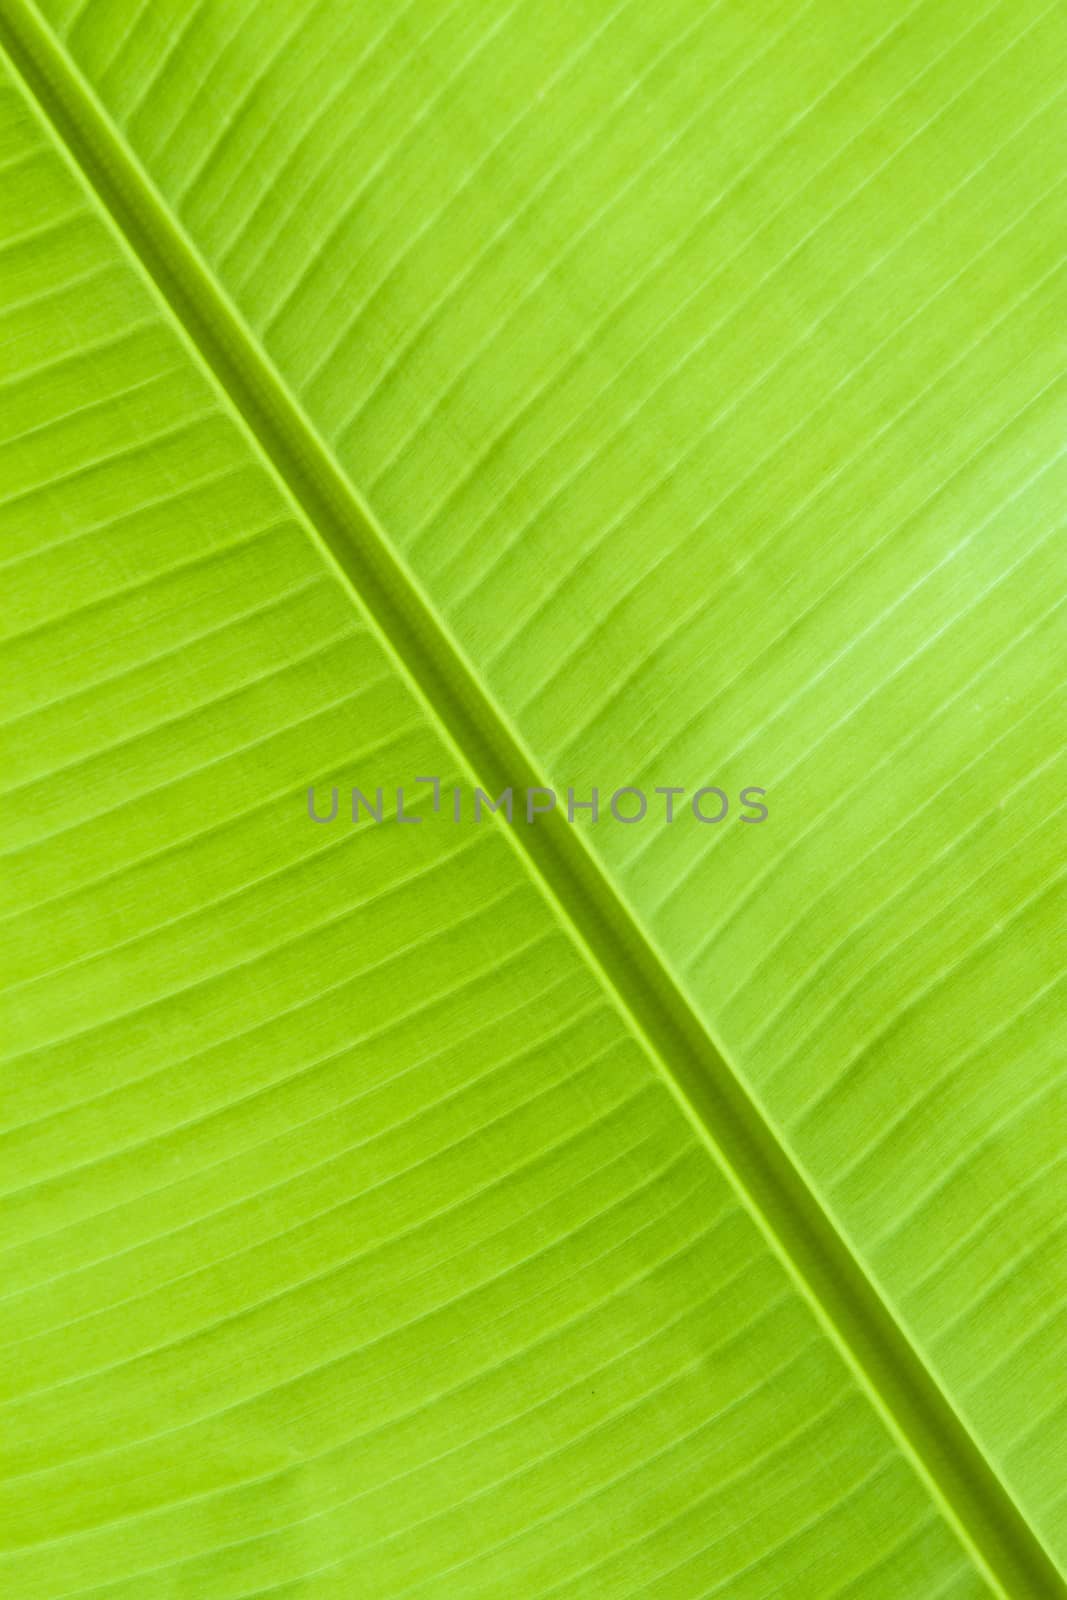 The green leaves of the banana tree leaves.